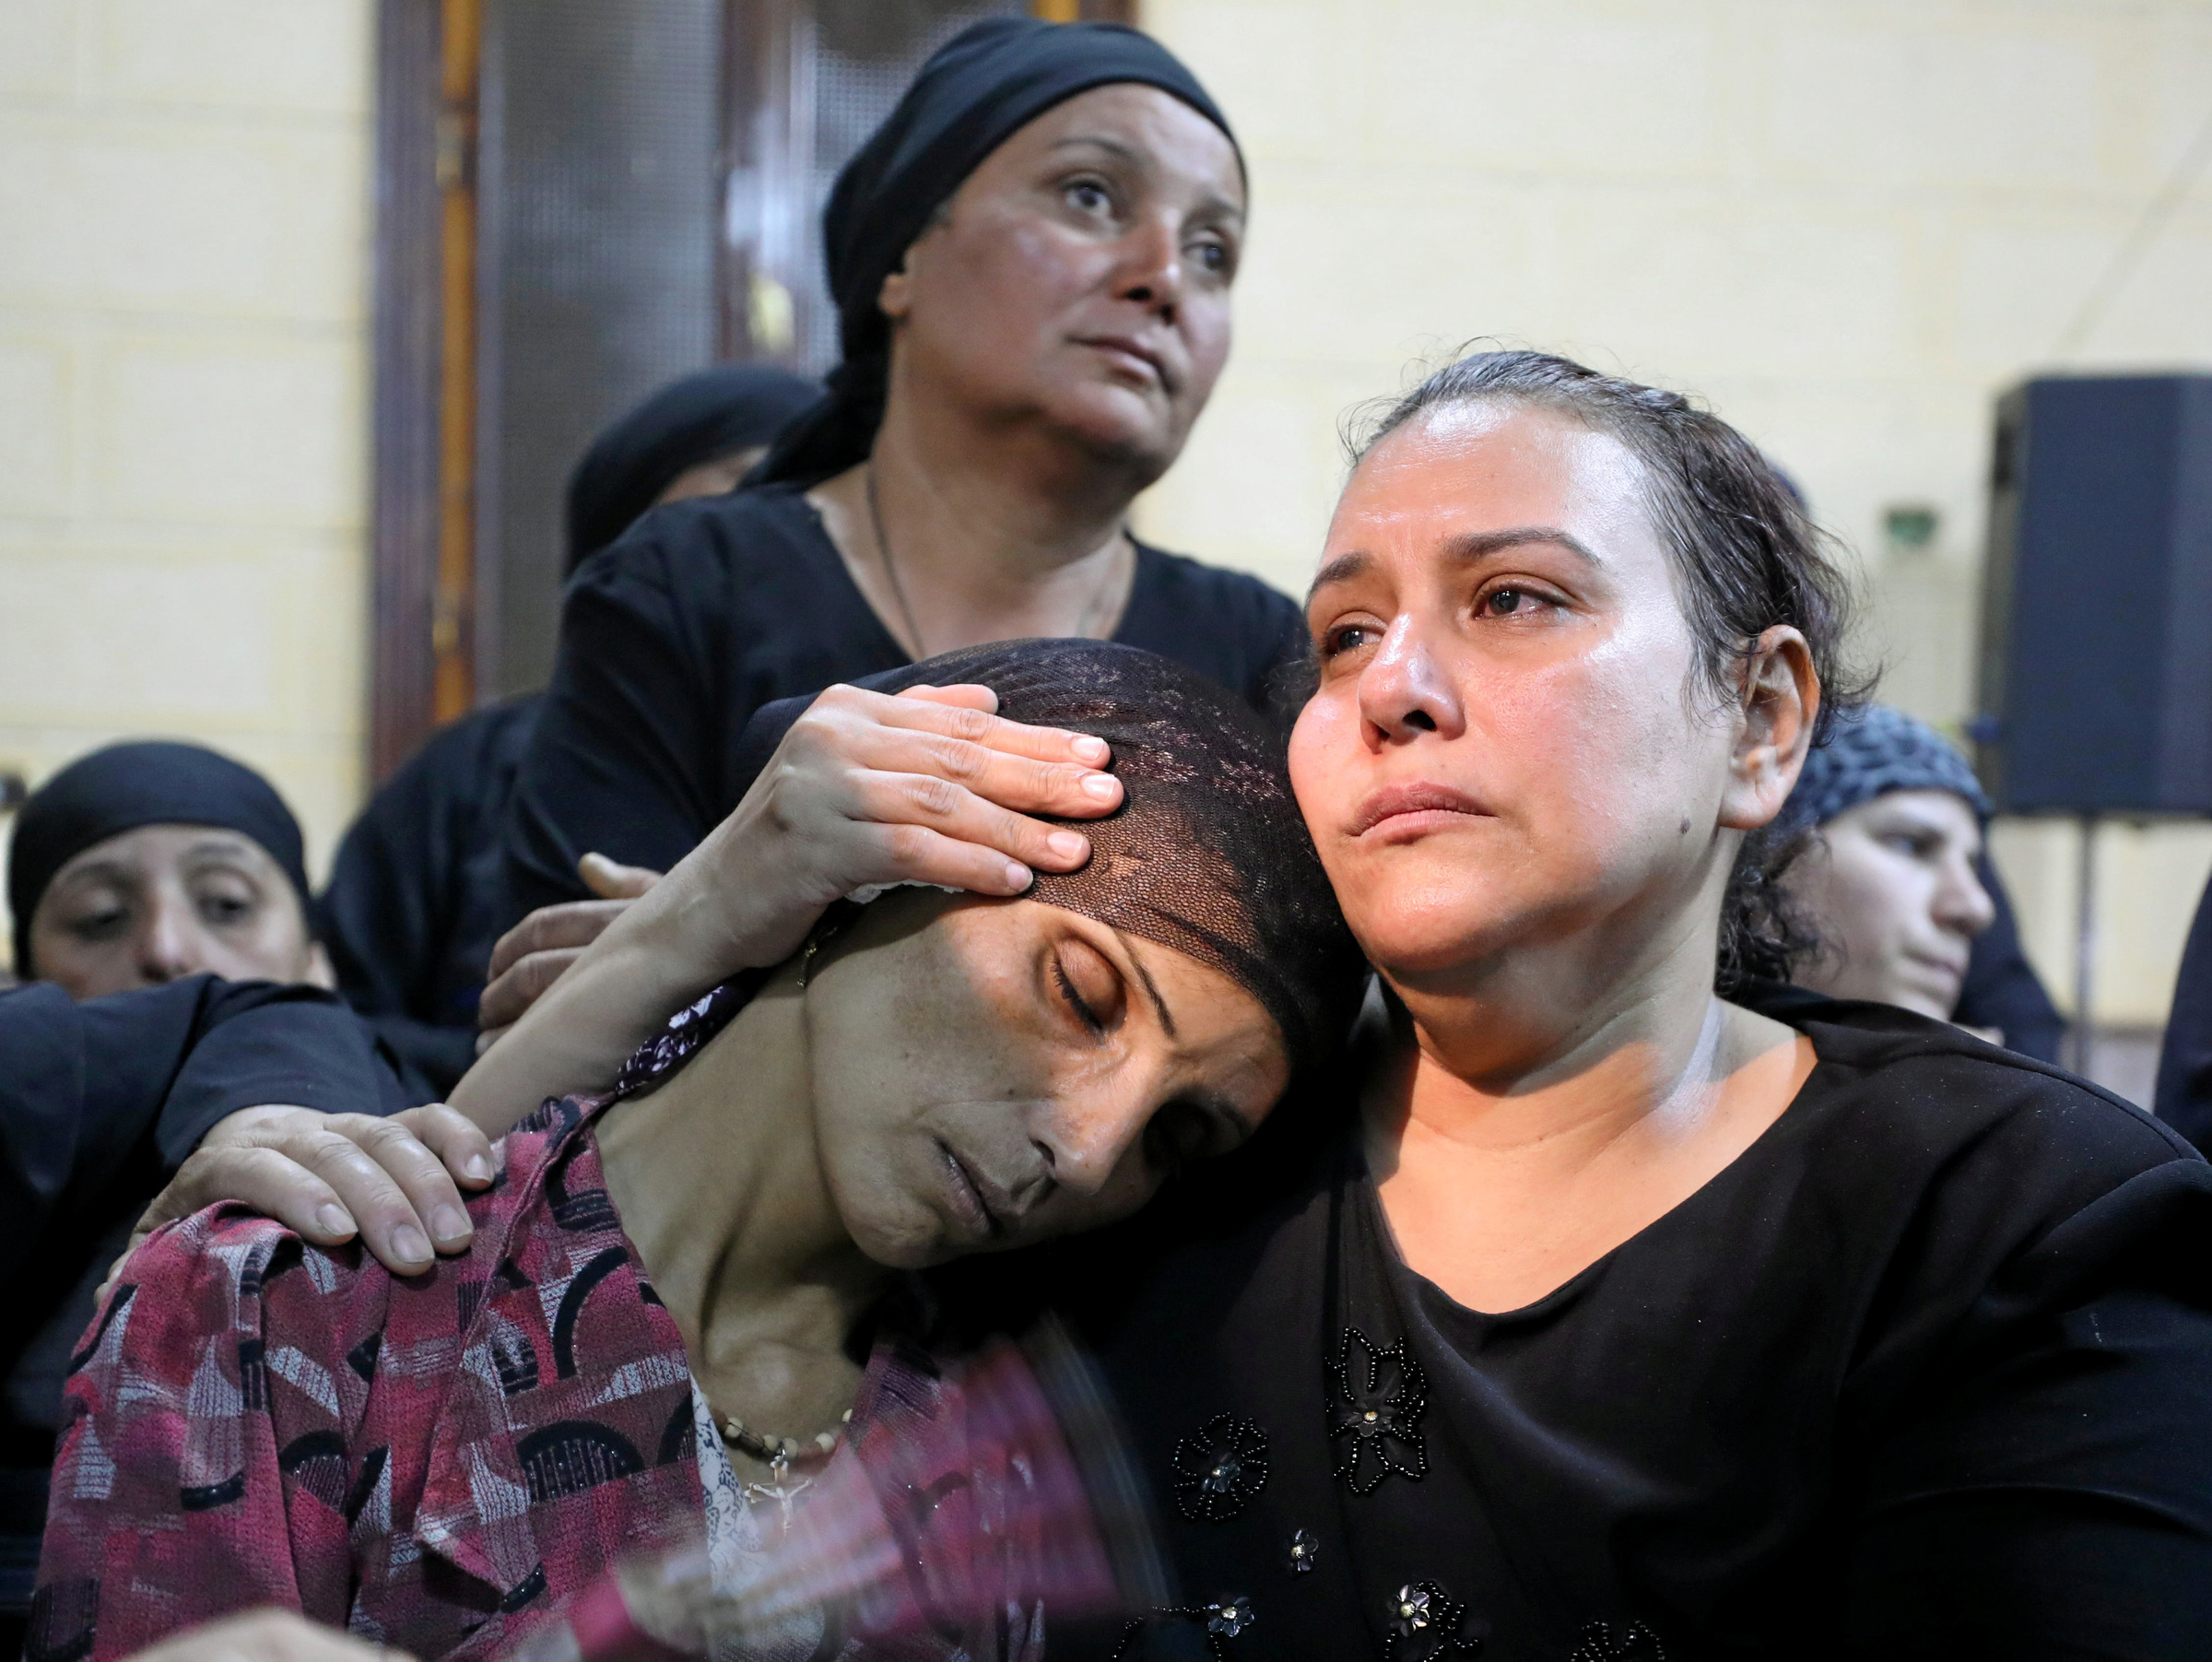 Priest says Egypt's Christians feel they could be martyrs at any time